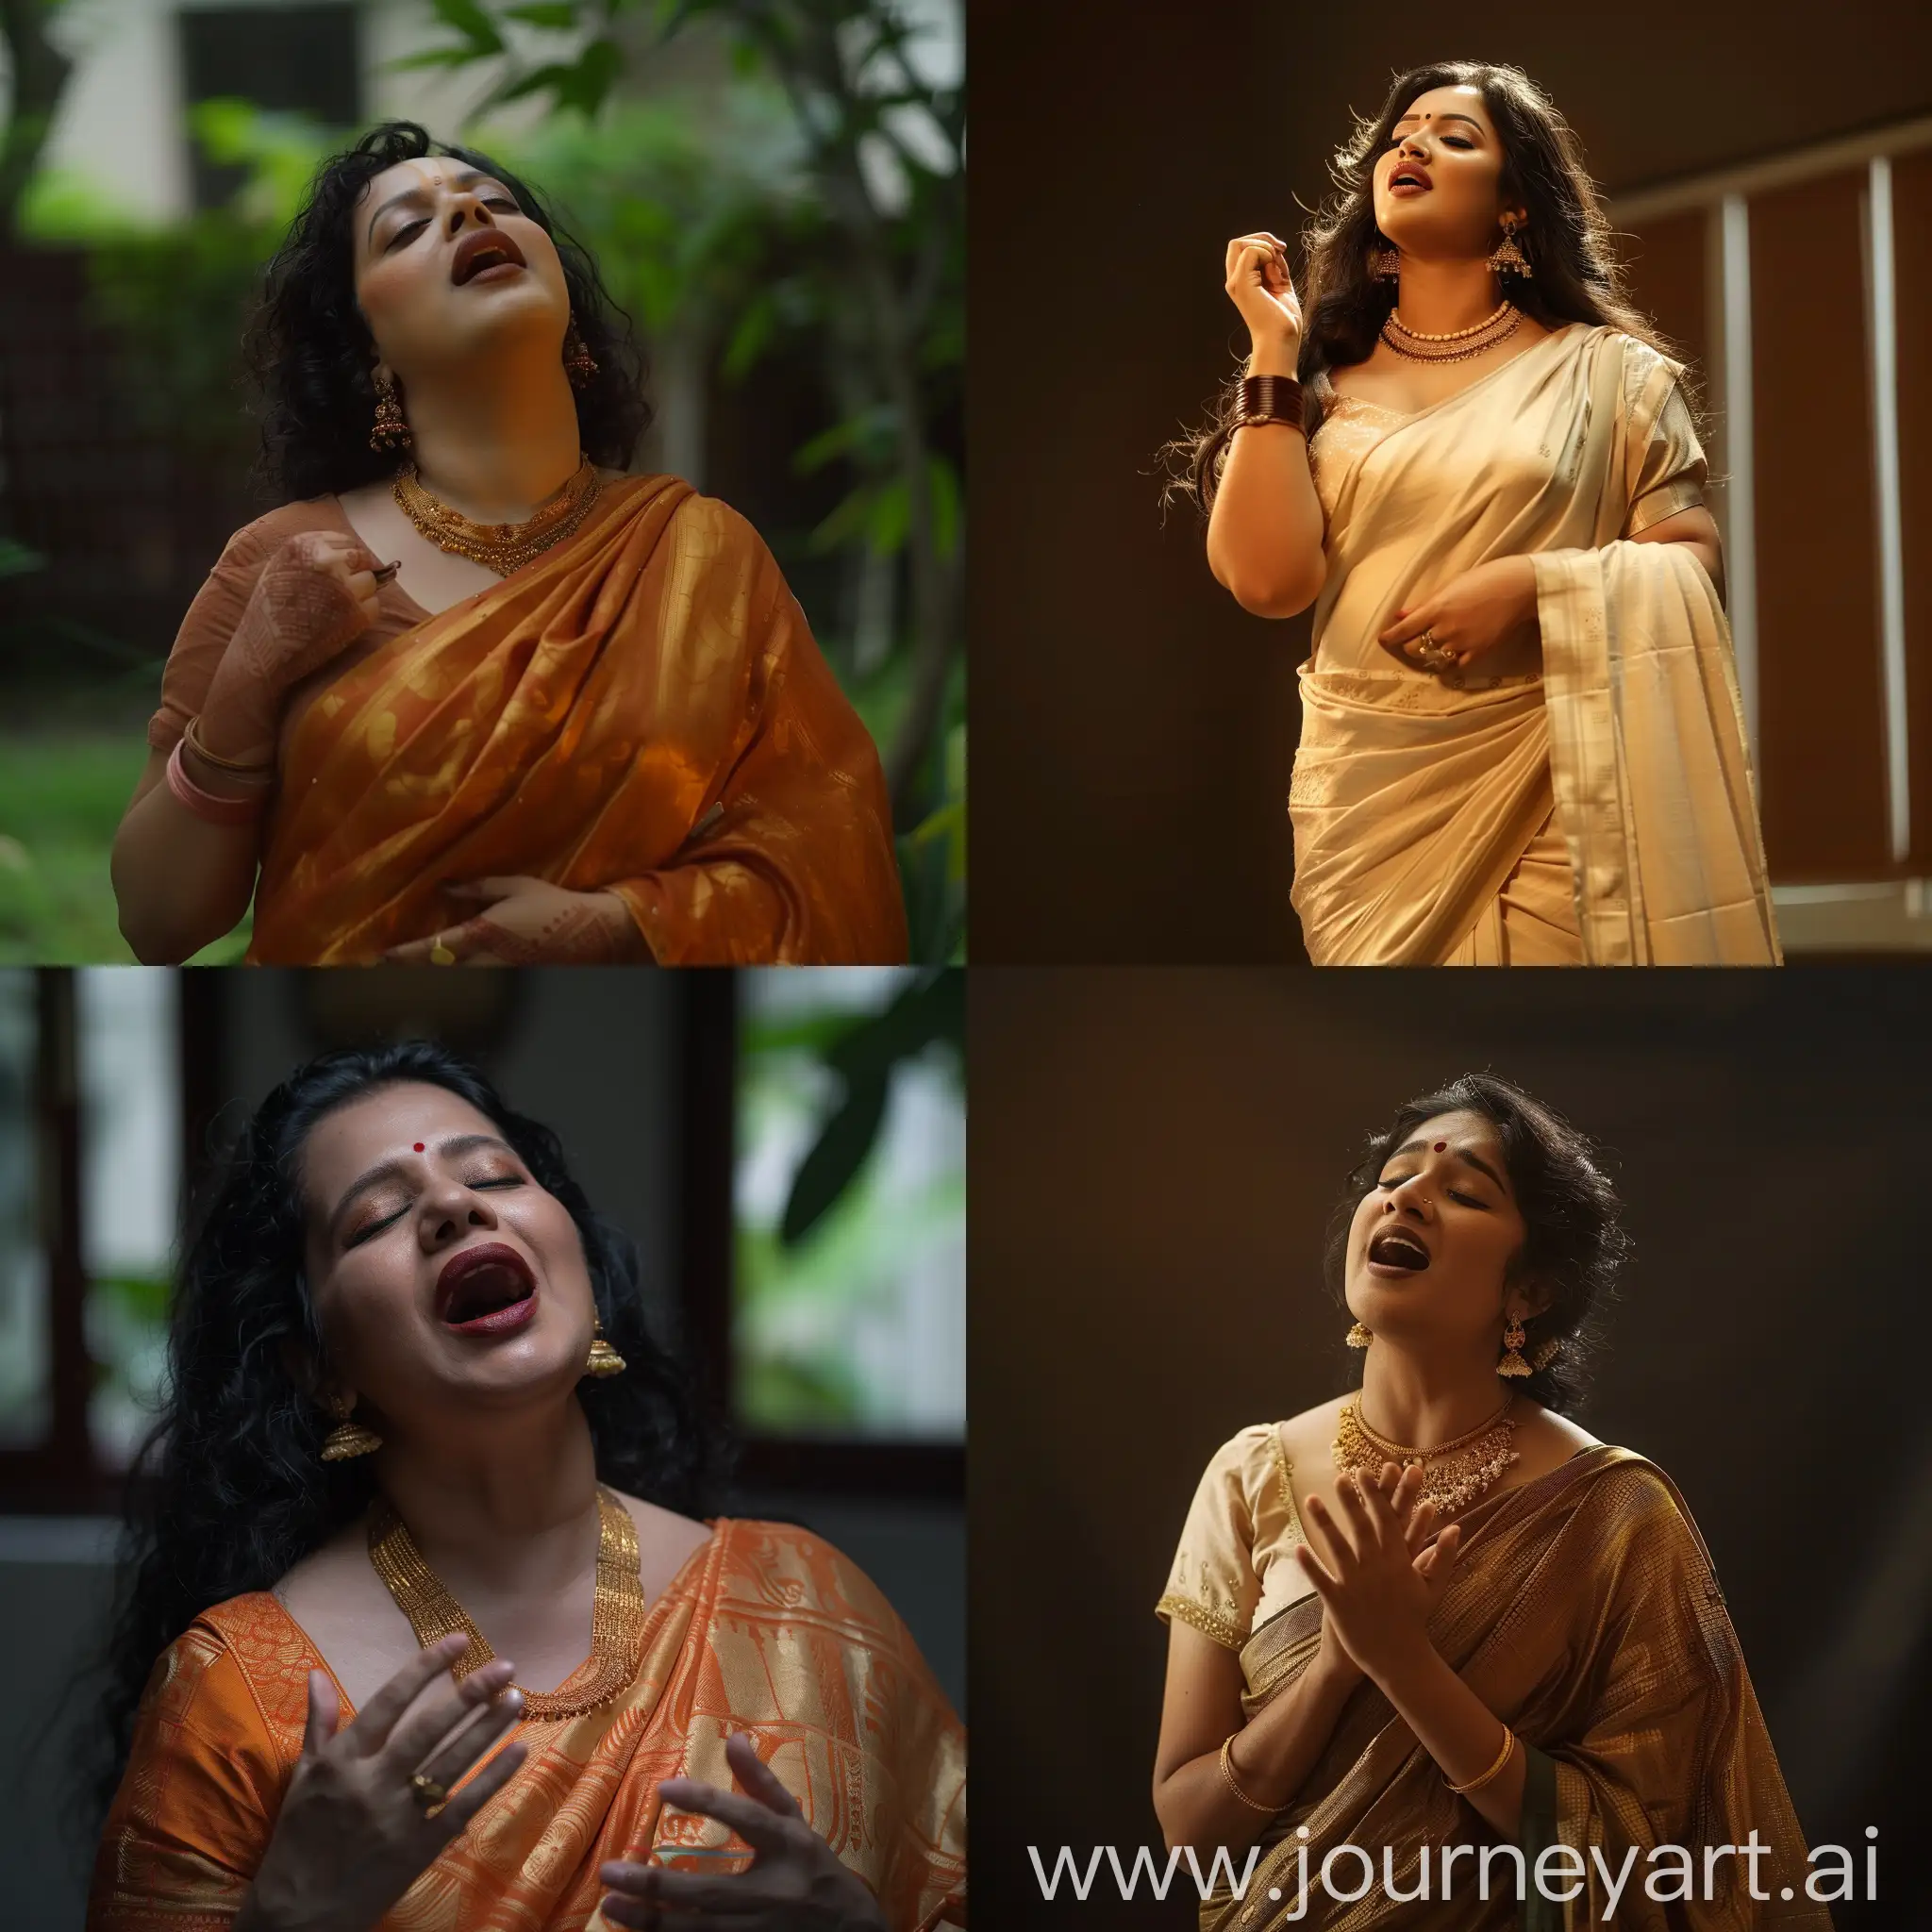 a very beautiful Malayali woman, curvy and alluring, like a porcelain doll singing a song, wearing a honey sweet saree, 85 mm lens, DSLR photography